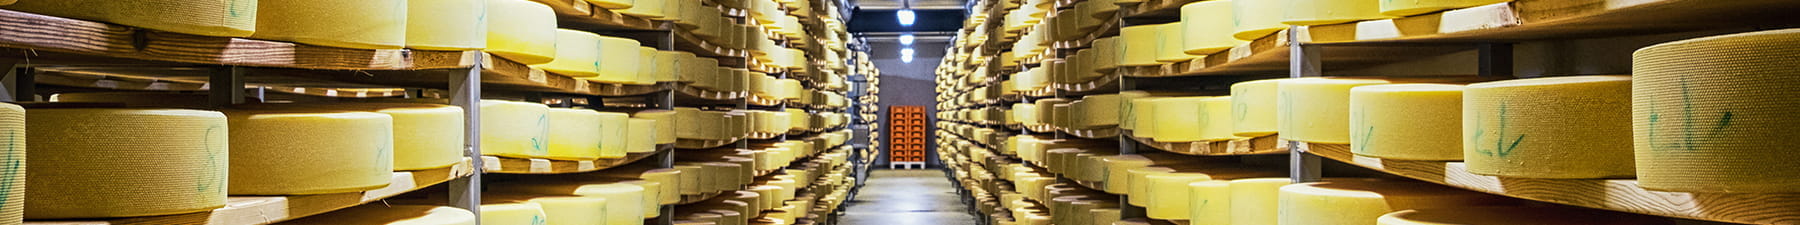 Round cheeses in warehouse